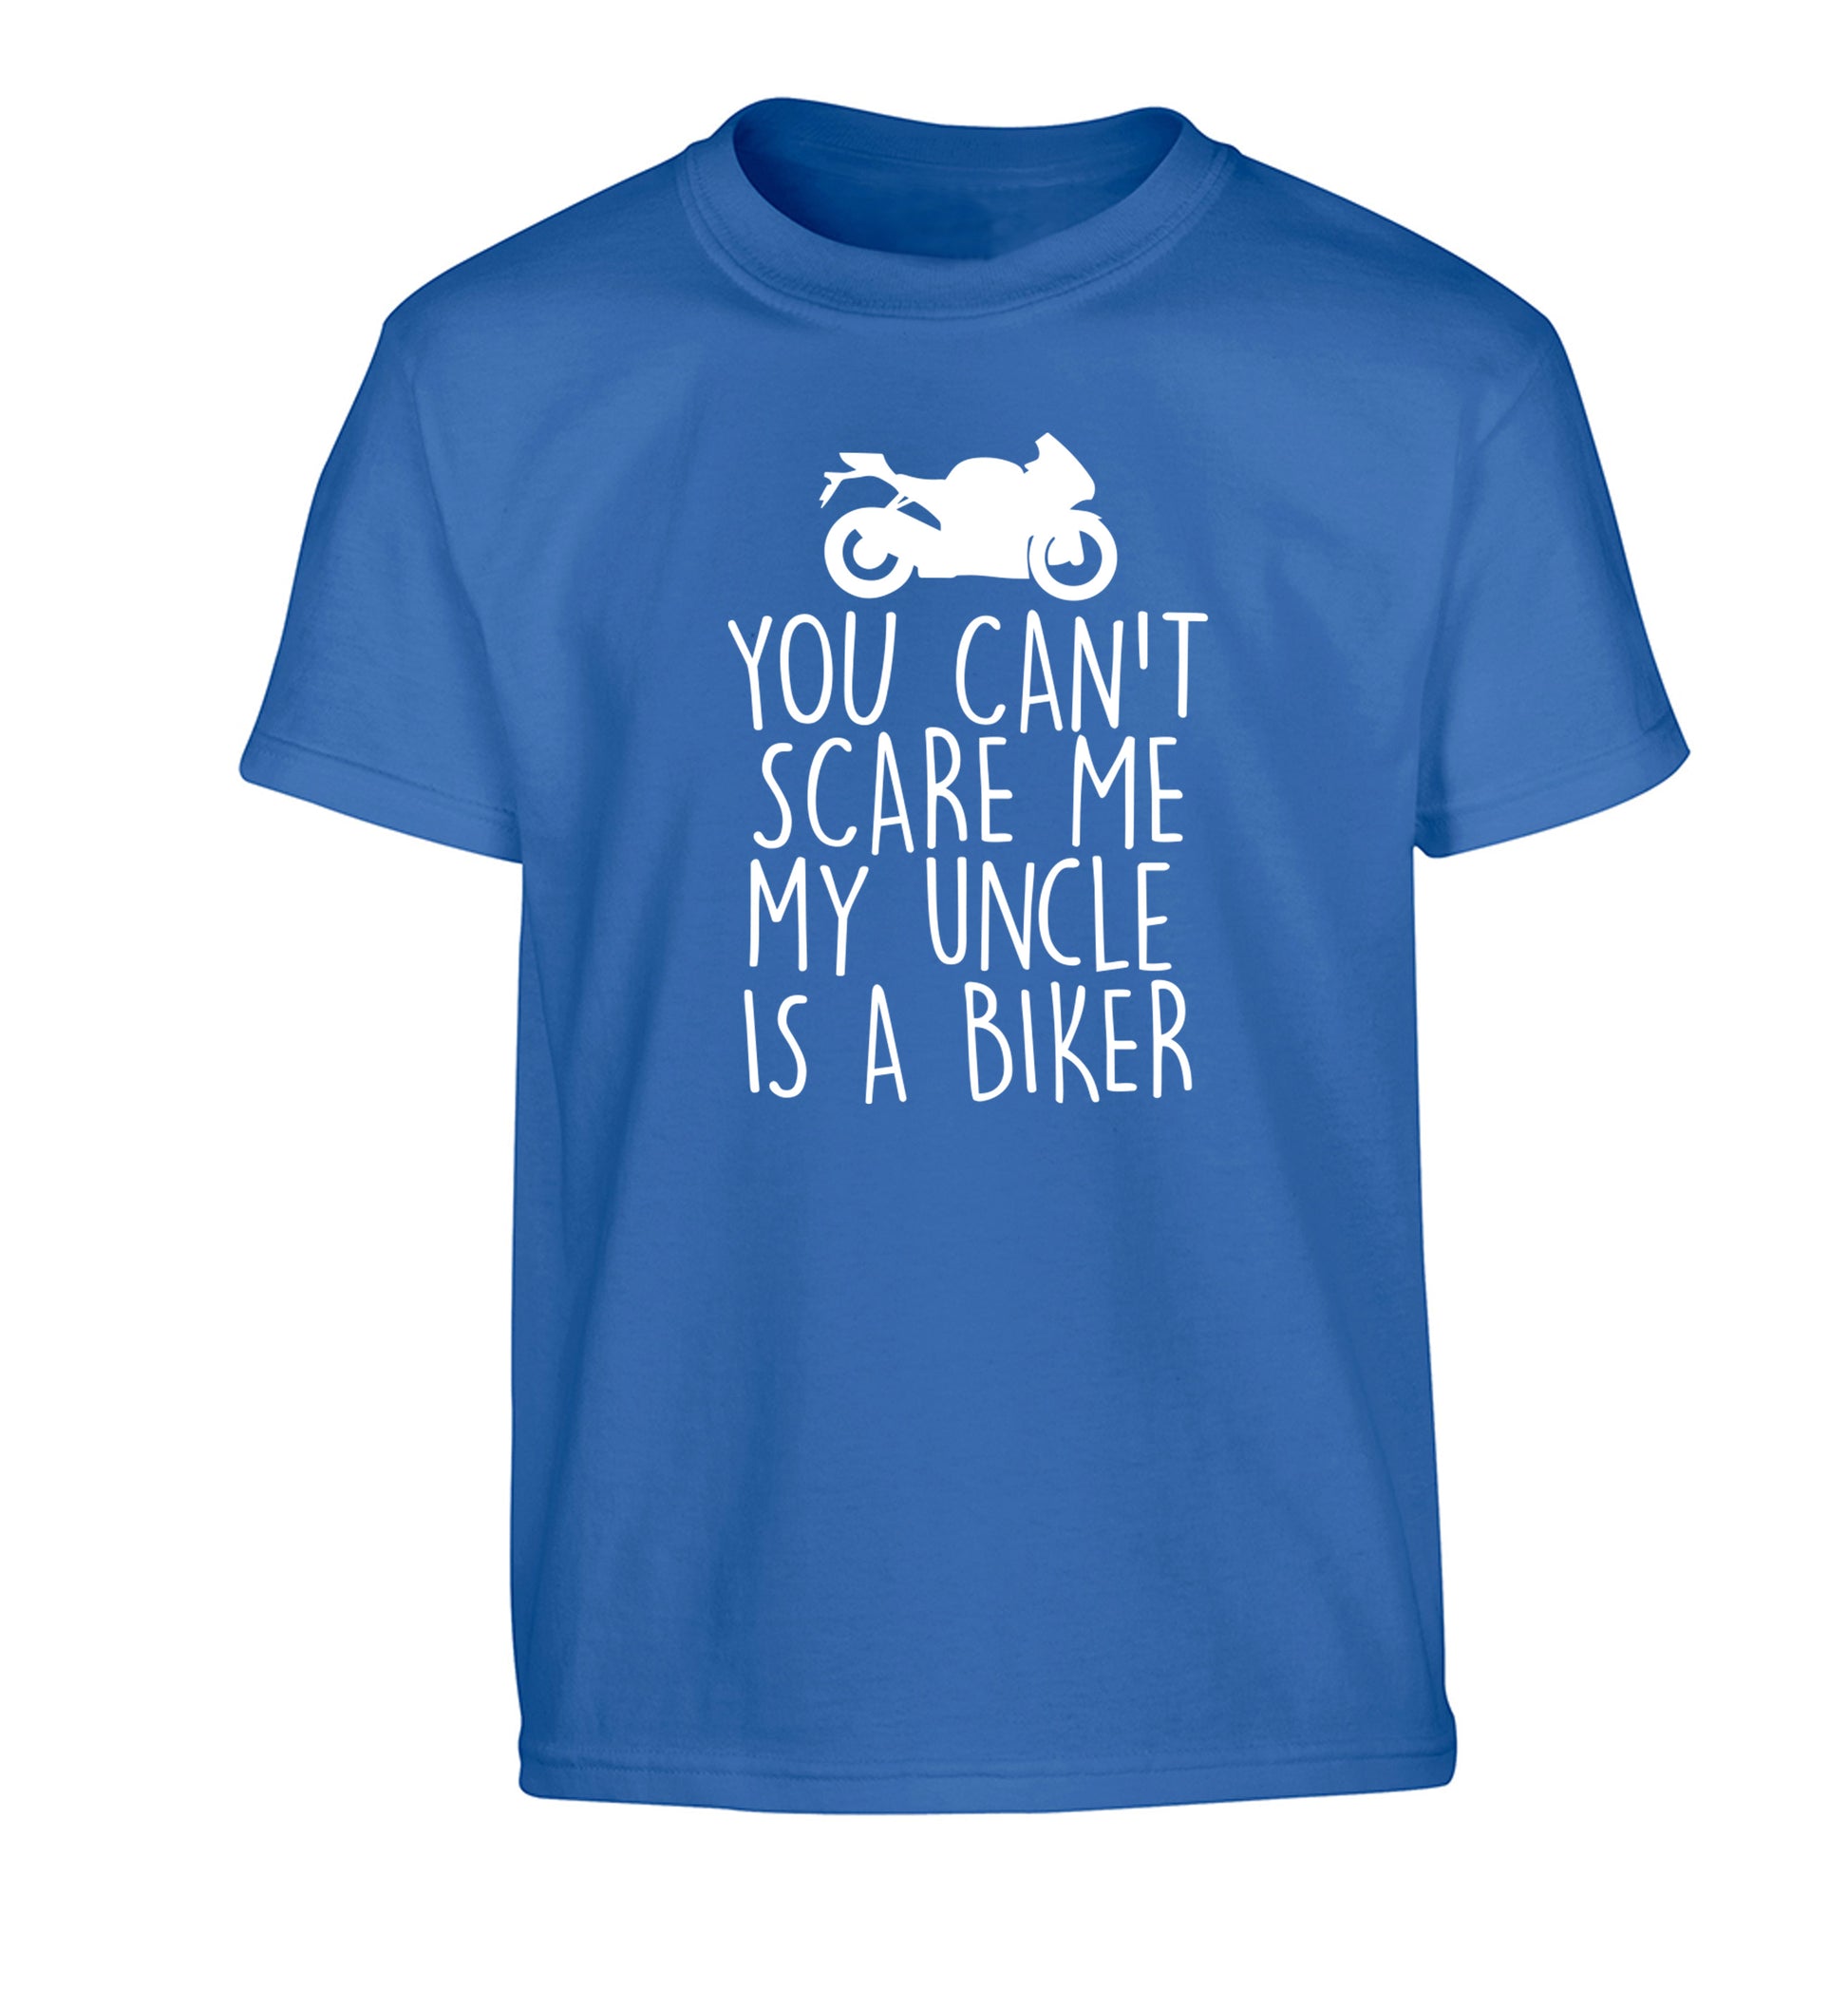 You can't scare me my uncle is a biker Children's blue Tshirt 12-13 Years